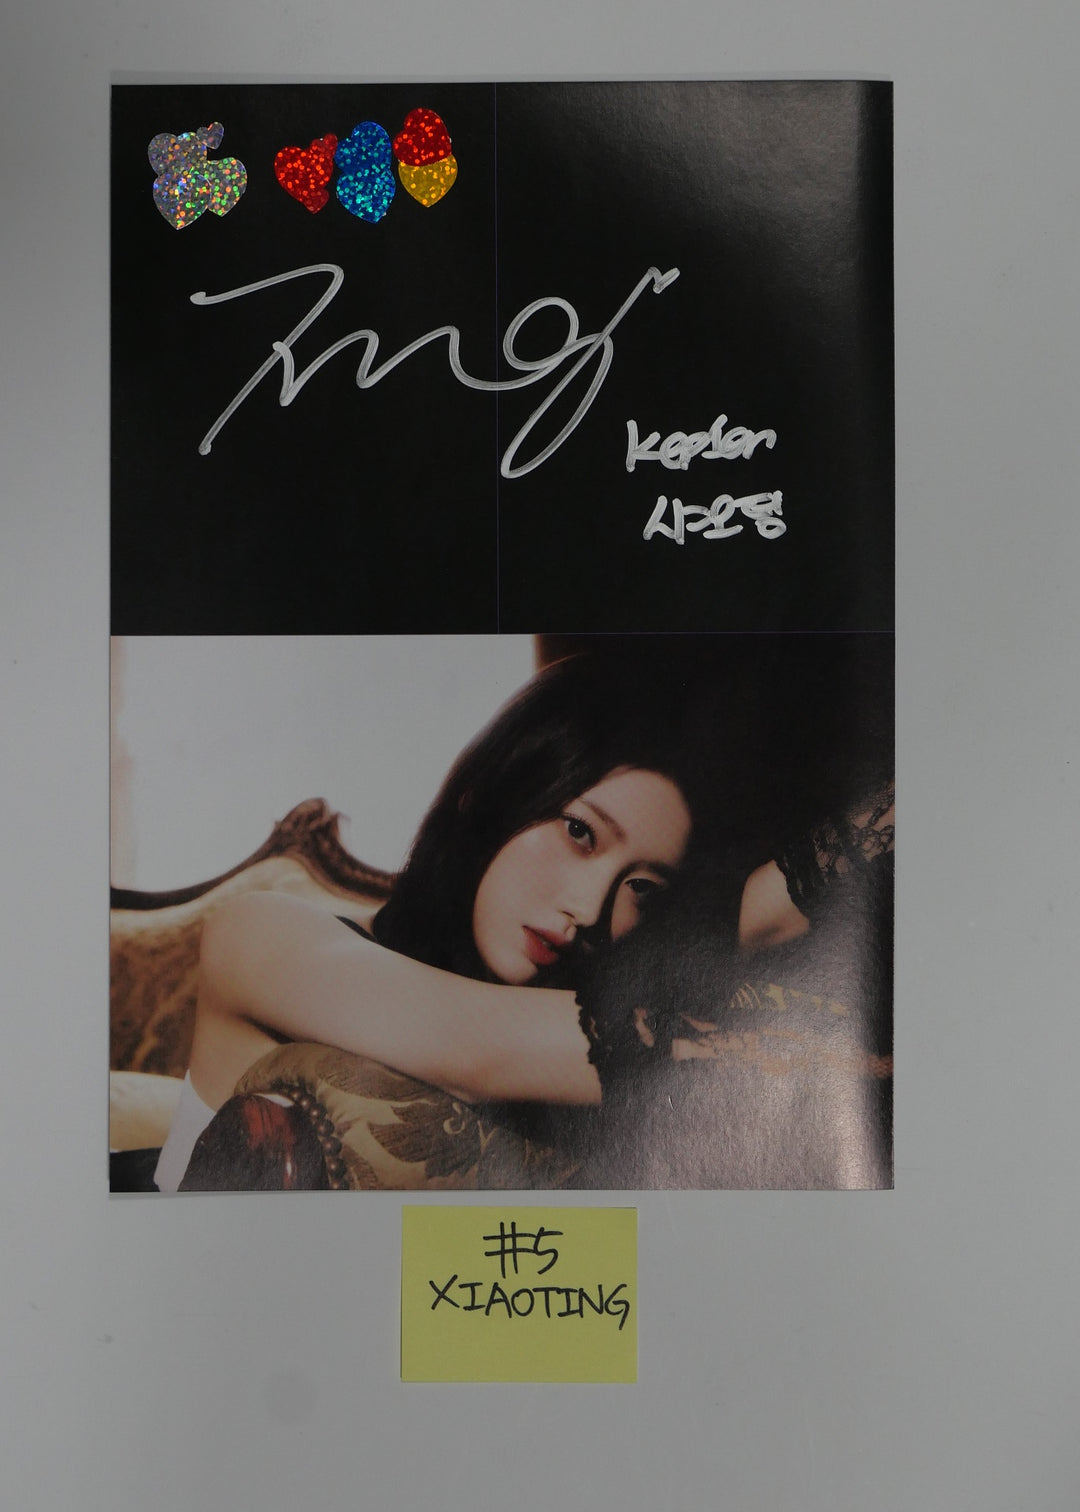 Kep1er "First Impact" 1st - A Cut Page From Fansign Event Album [YUJIN, XIAOTING, MASHIRO]